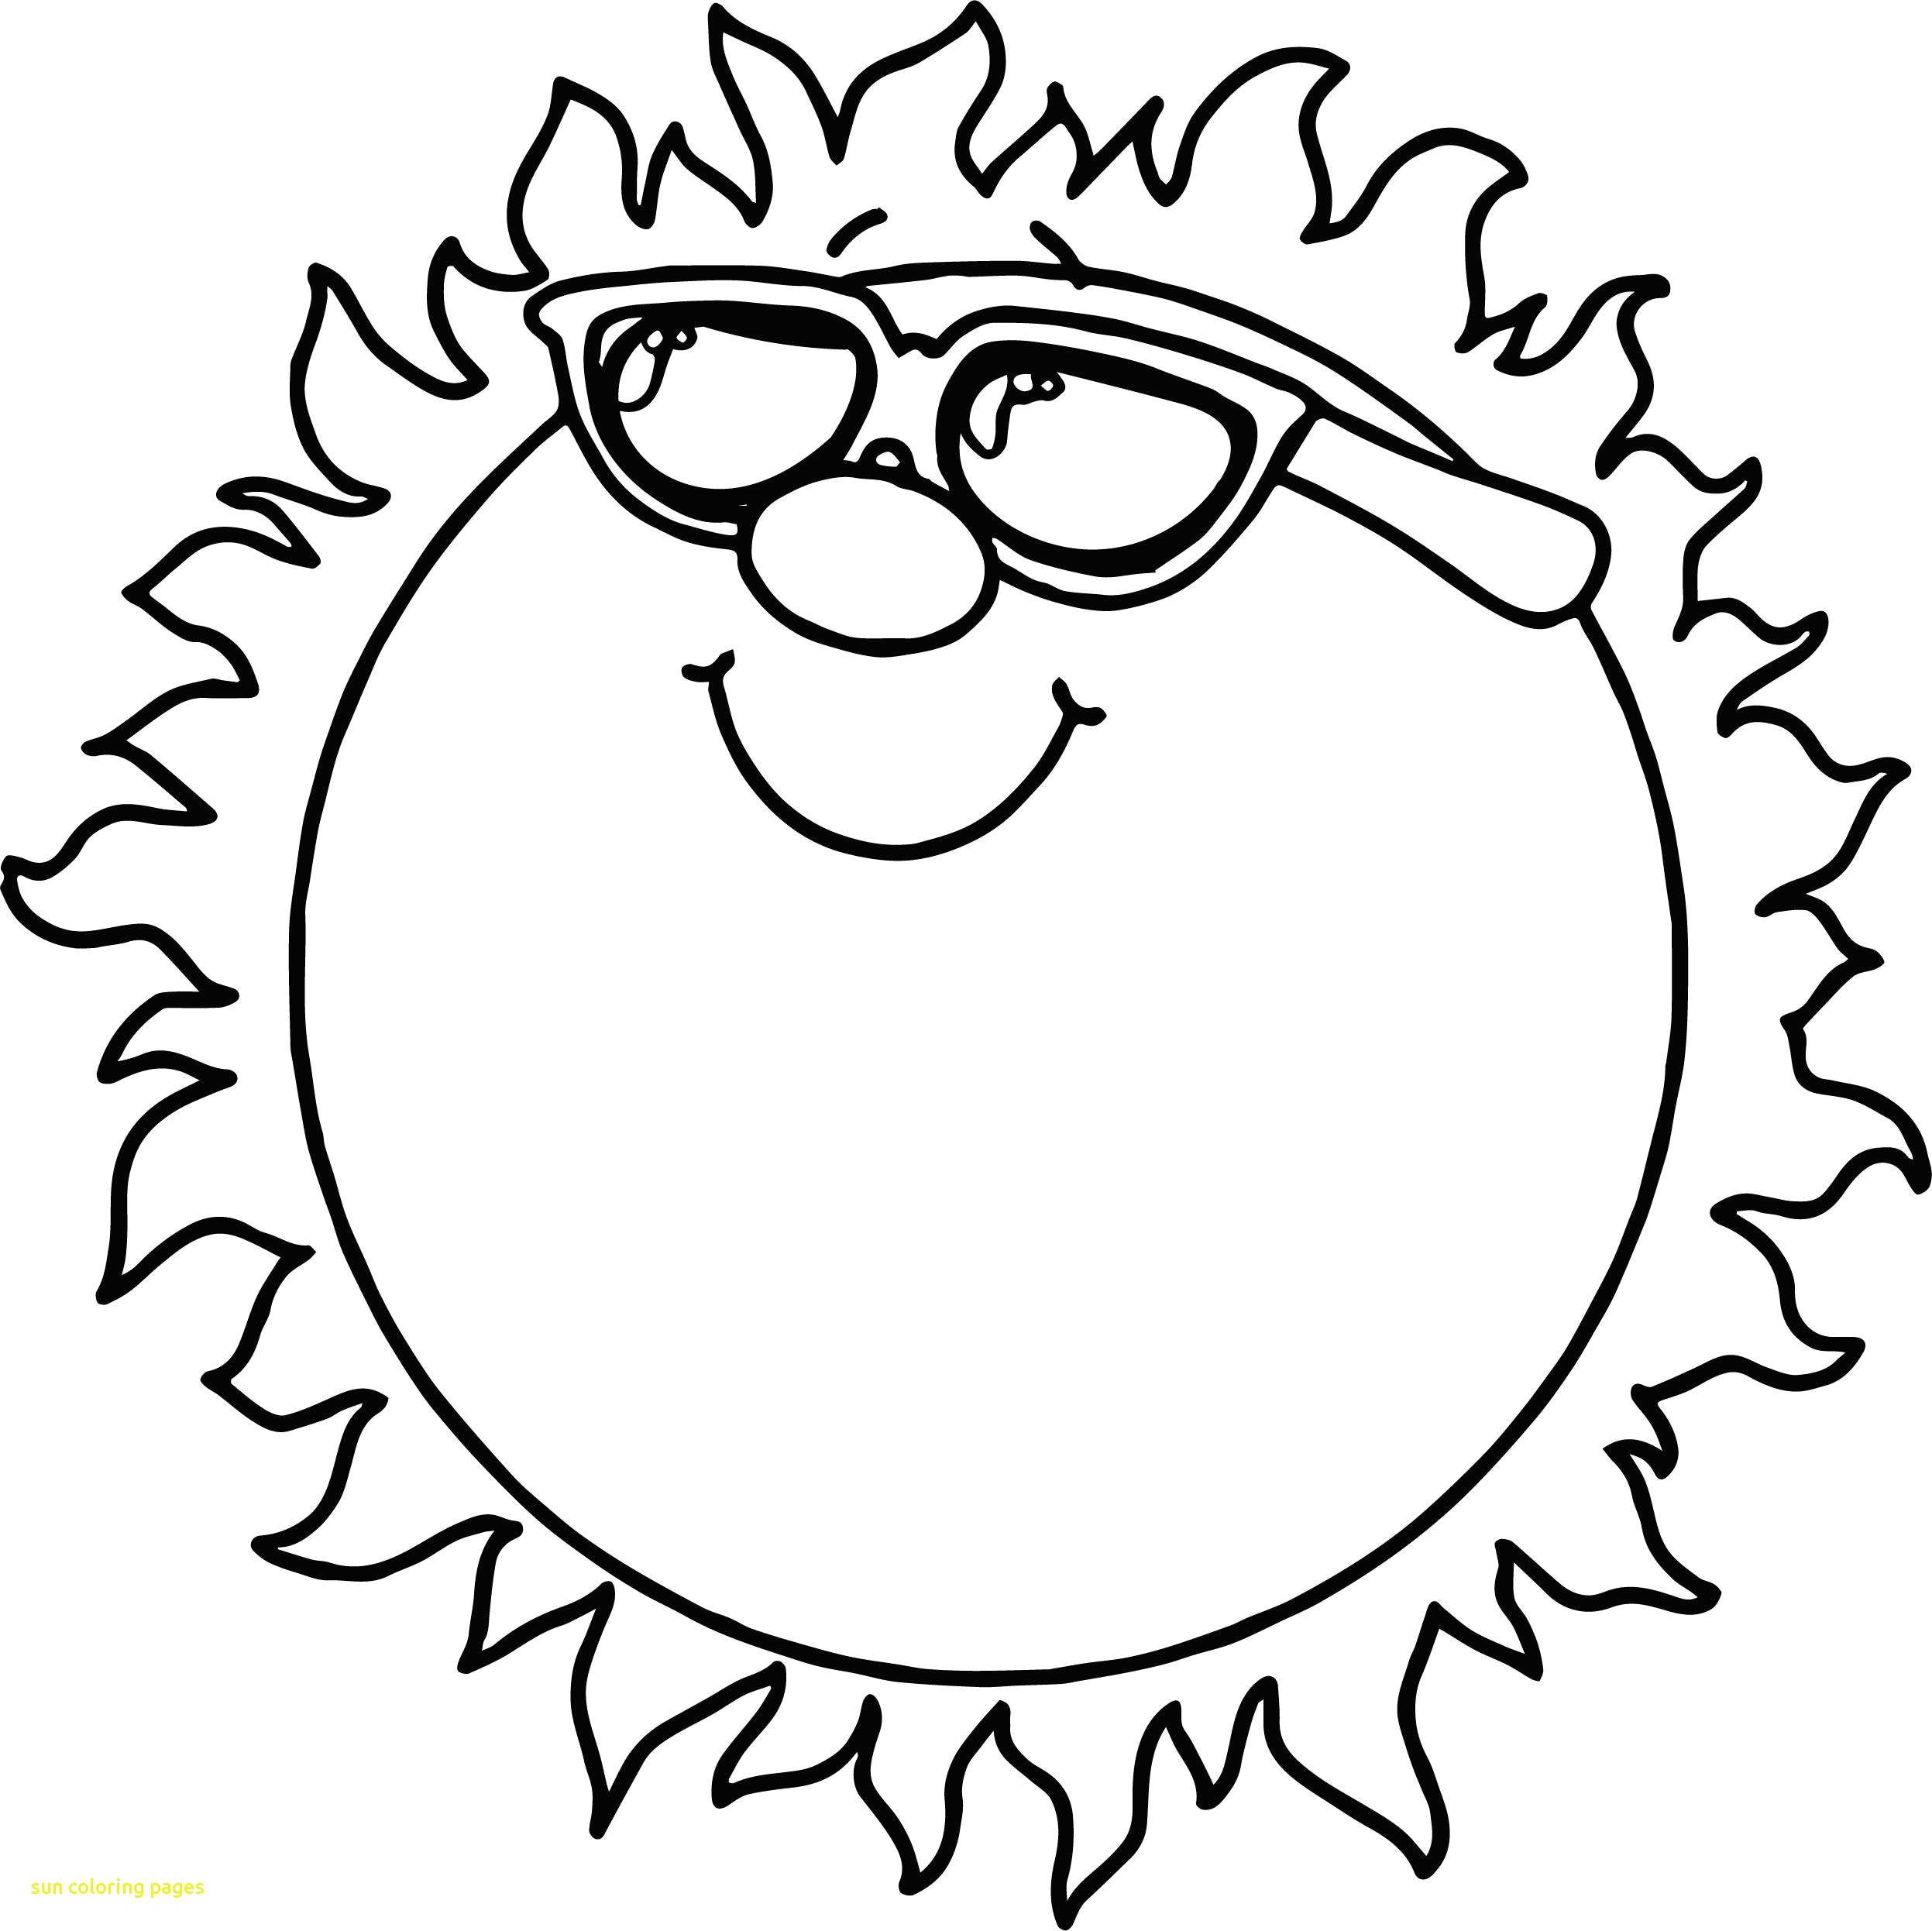 easy thanksgiving crafts unique drawing for kids new printable sun colouring 31 for preschoolers 0d of